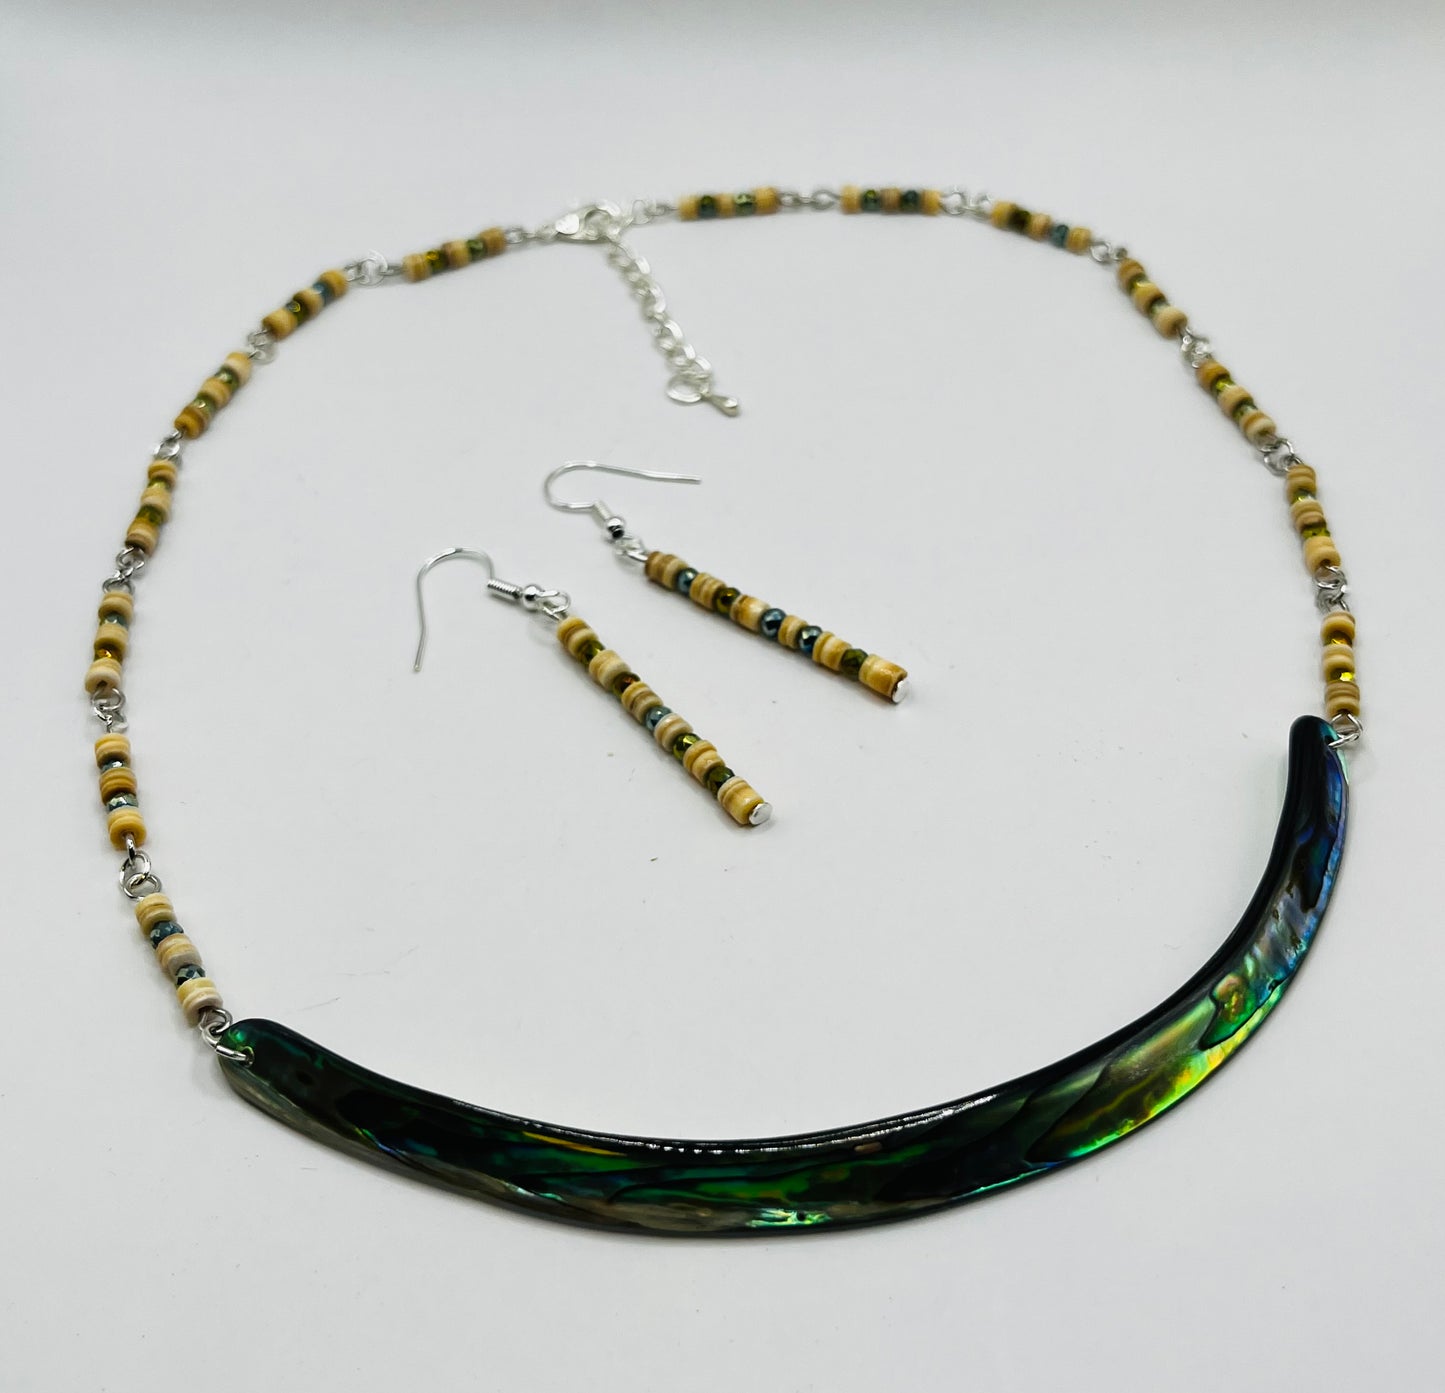 Abalone necklace and earrings set